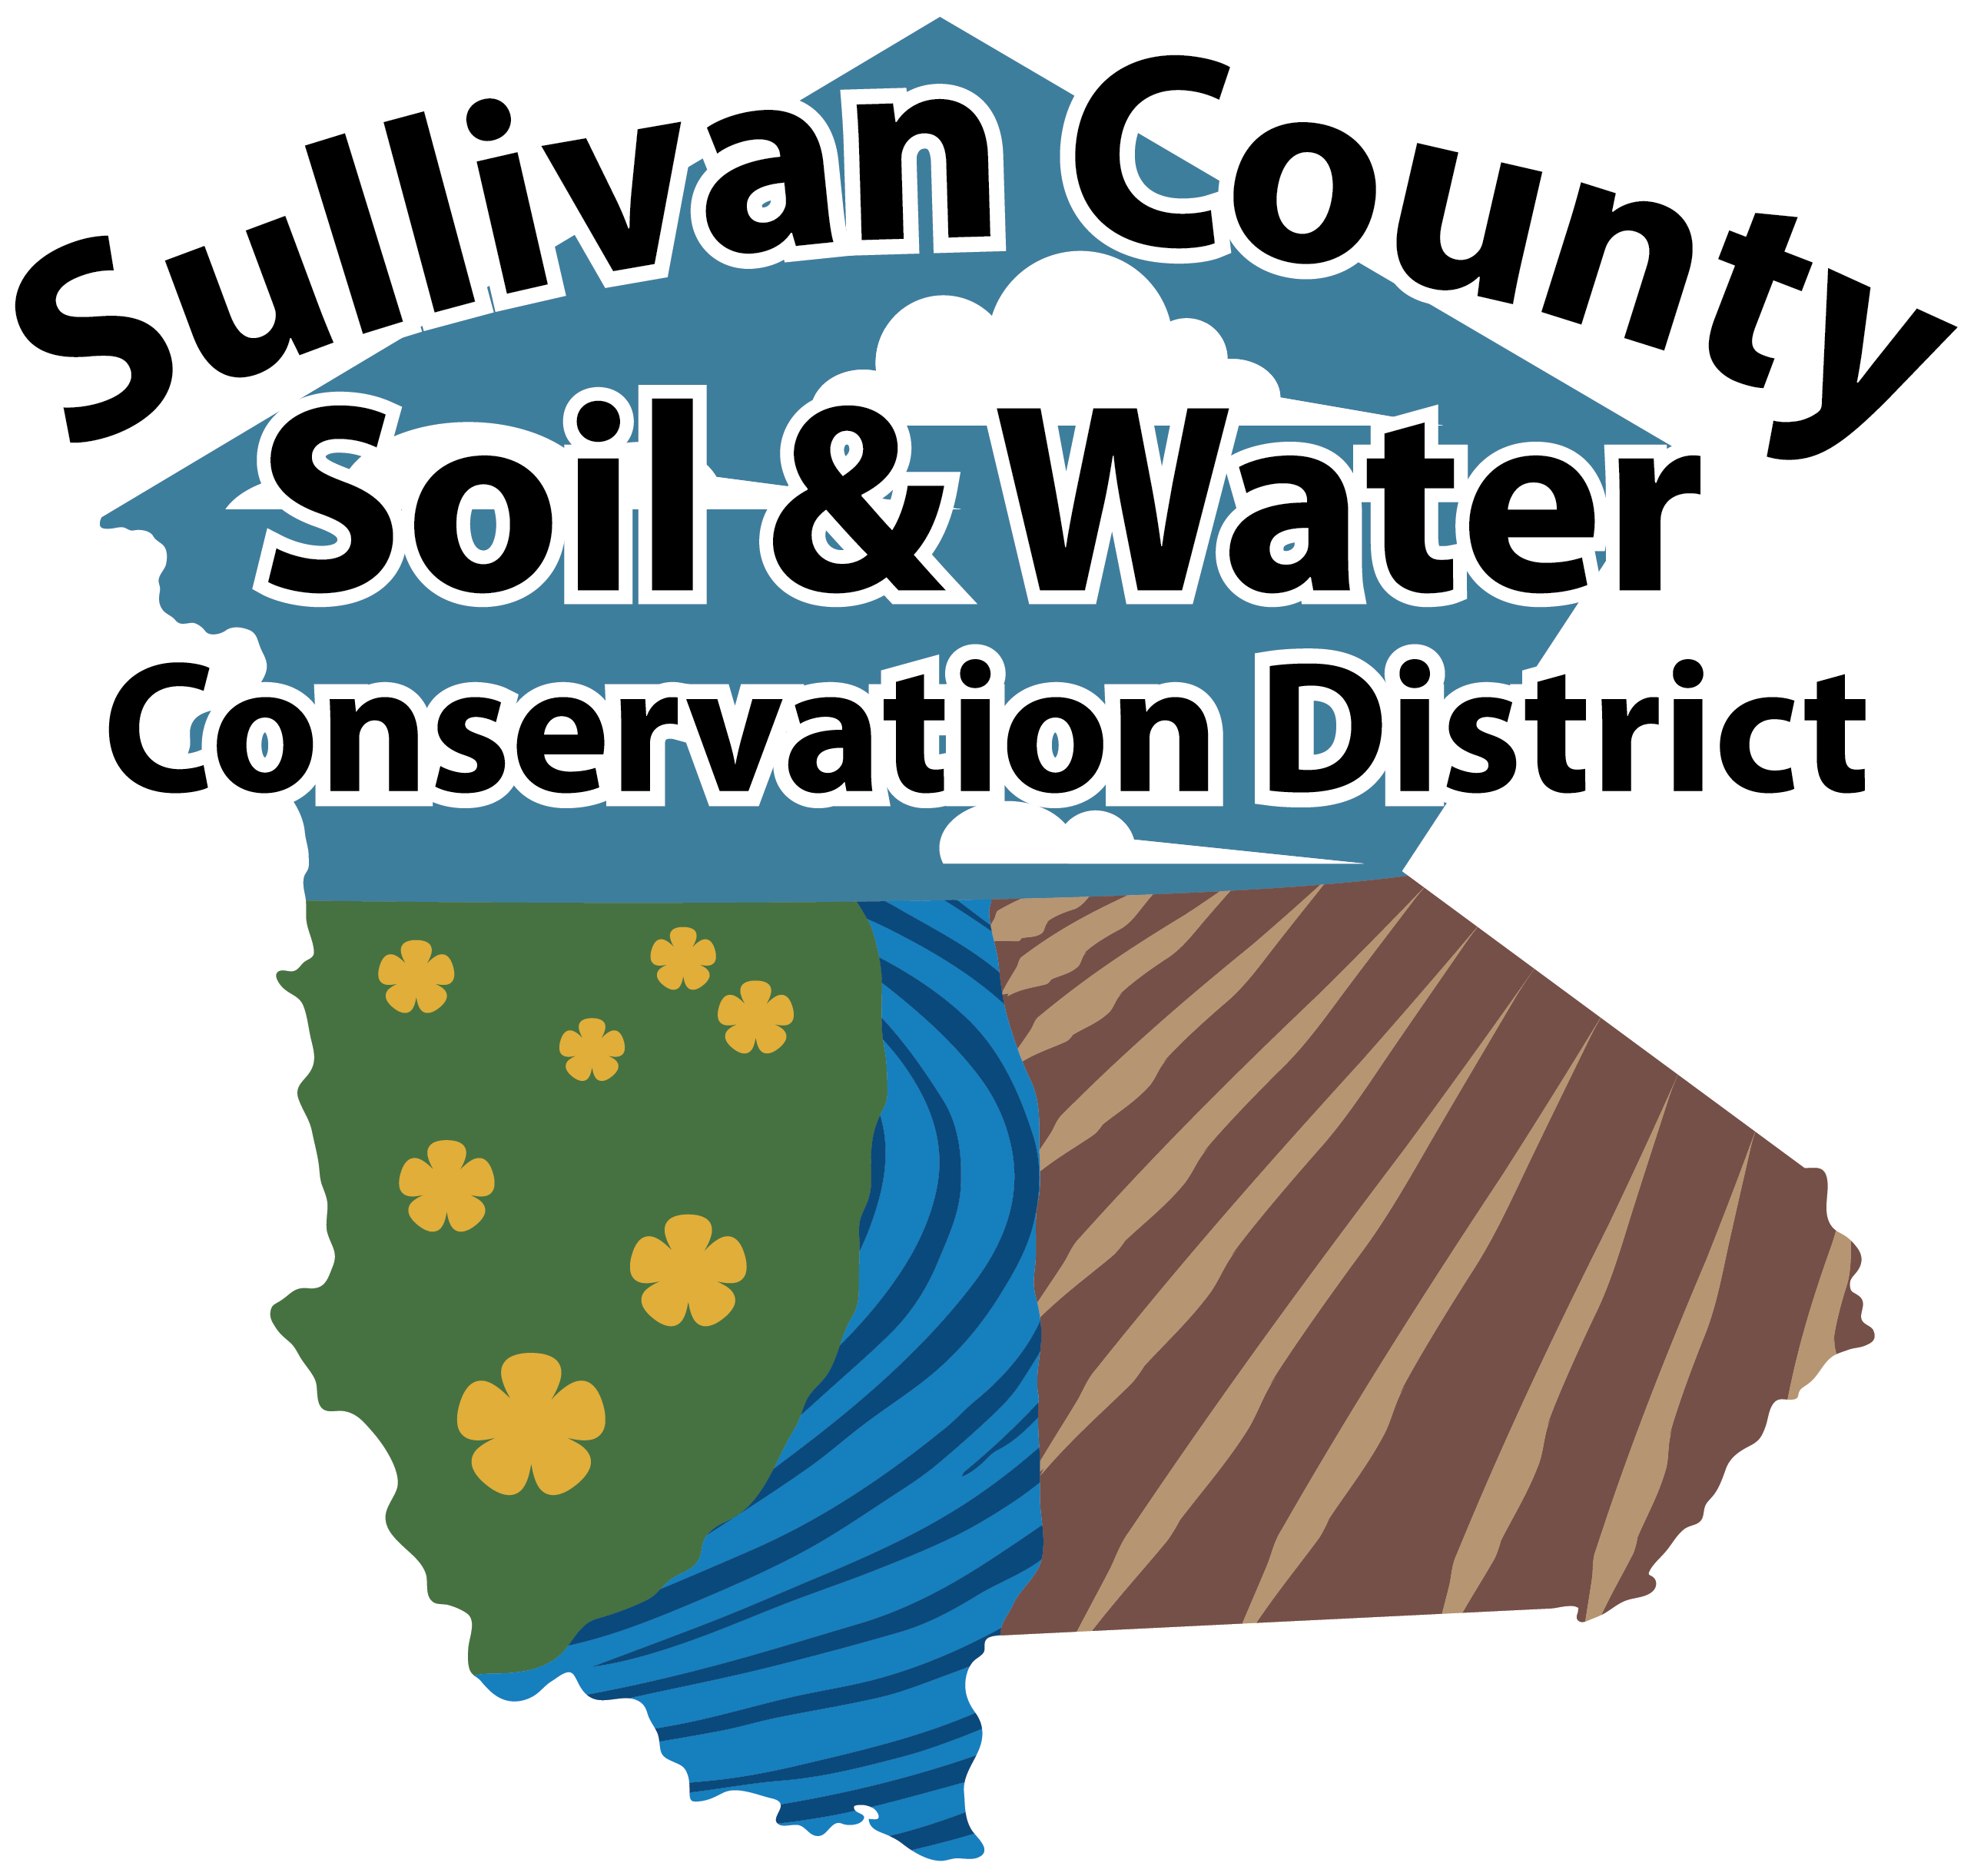 Sullivan County Soil & Water Conservation District